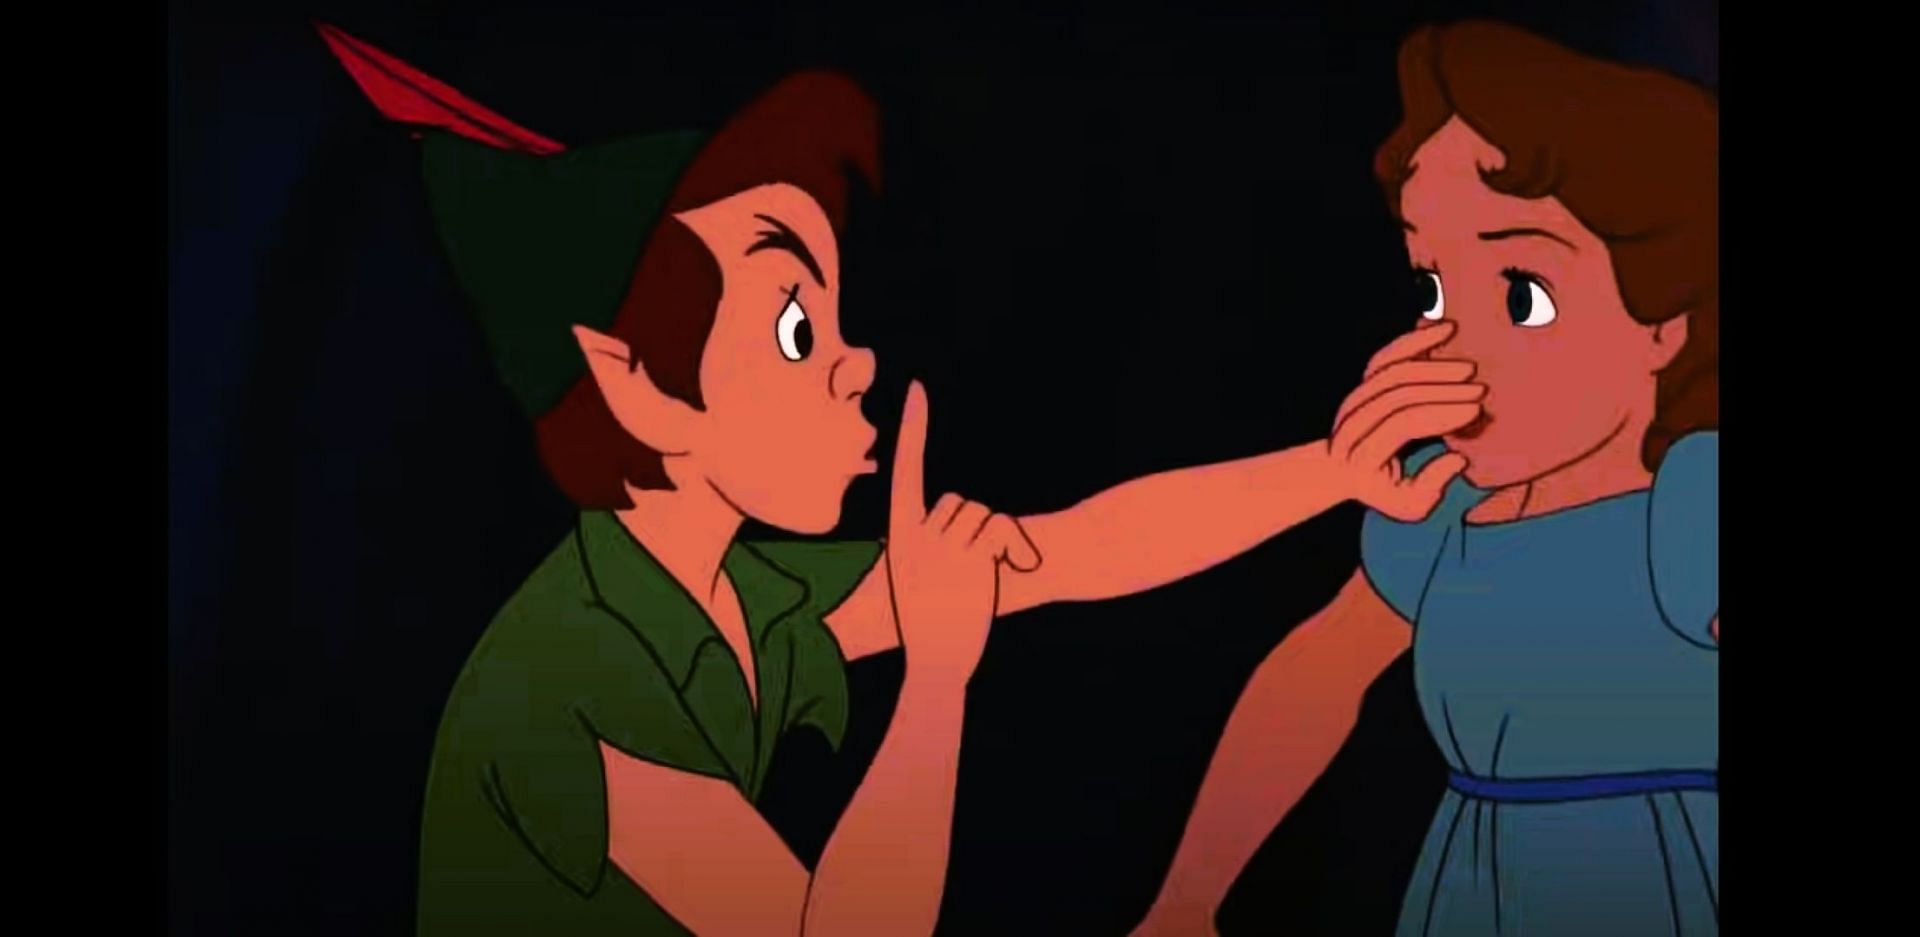 Peter Pan&#039;s character may be darker than you think (Image via YouTube/MovieConAnimation)